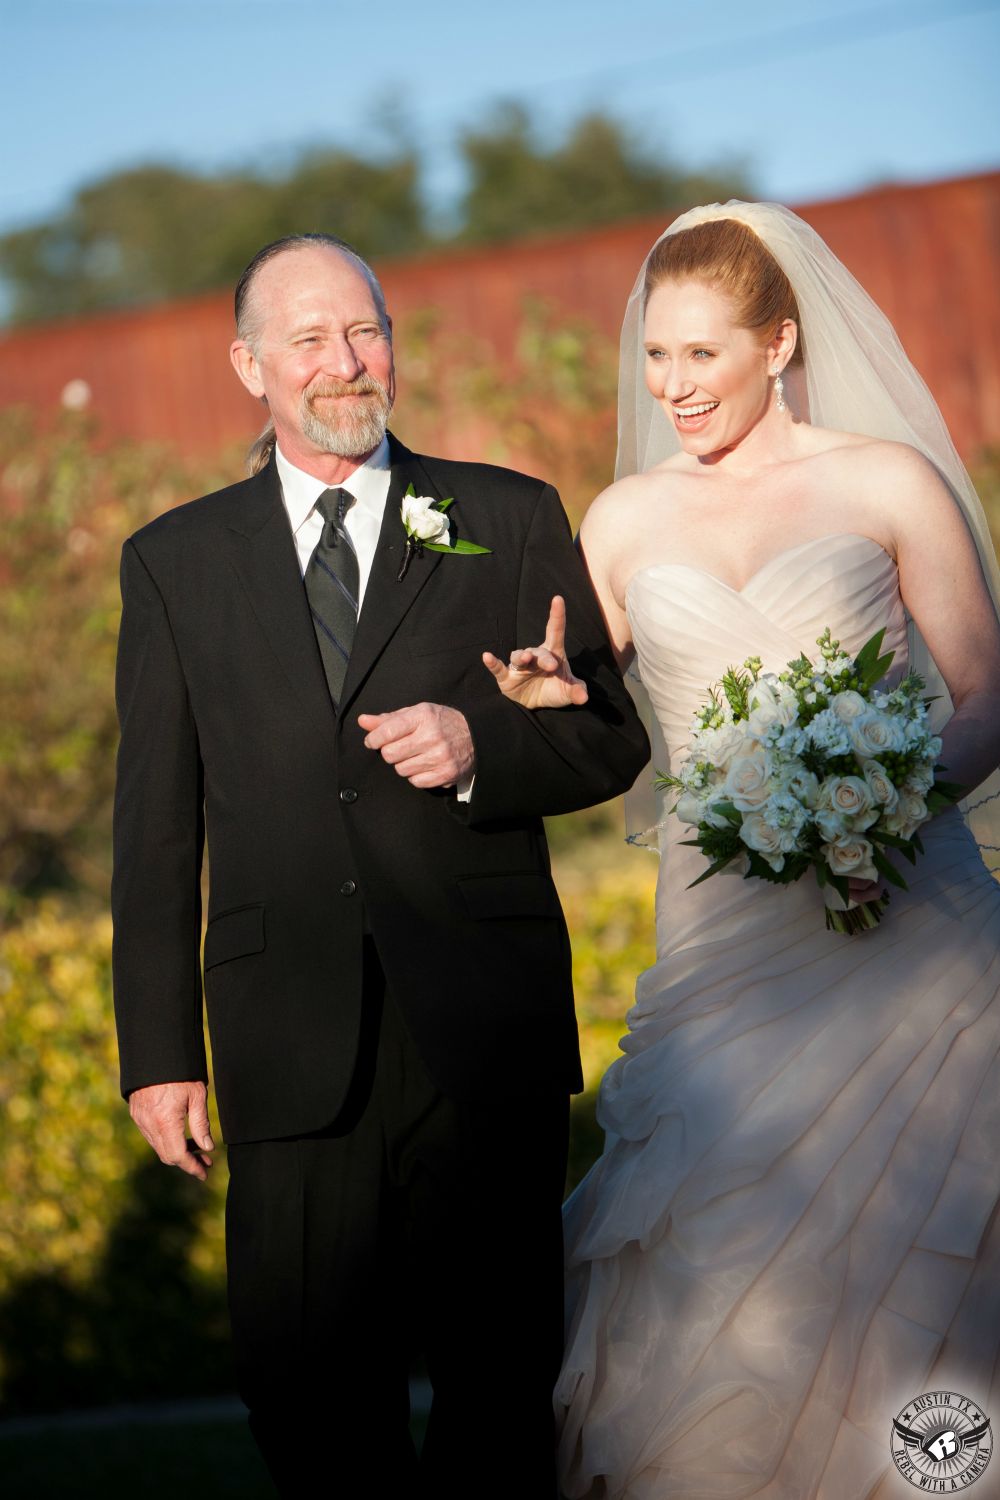 Father of the bride who carries luscious white bridal bouquet from Verbena Floral Design Austin wedding florist walks her down the aisle at Vintage Villas wedding venue in Austin on Lake Travis.